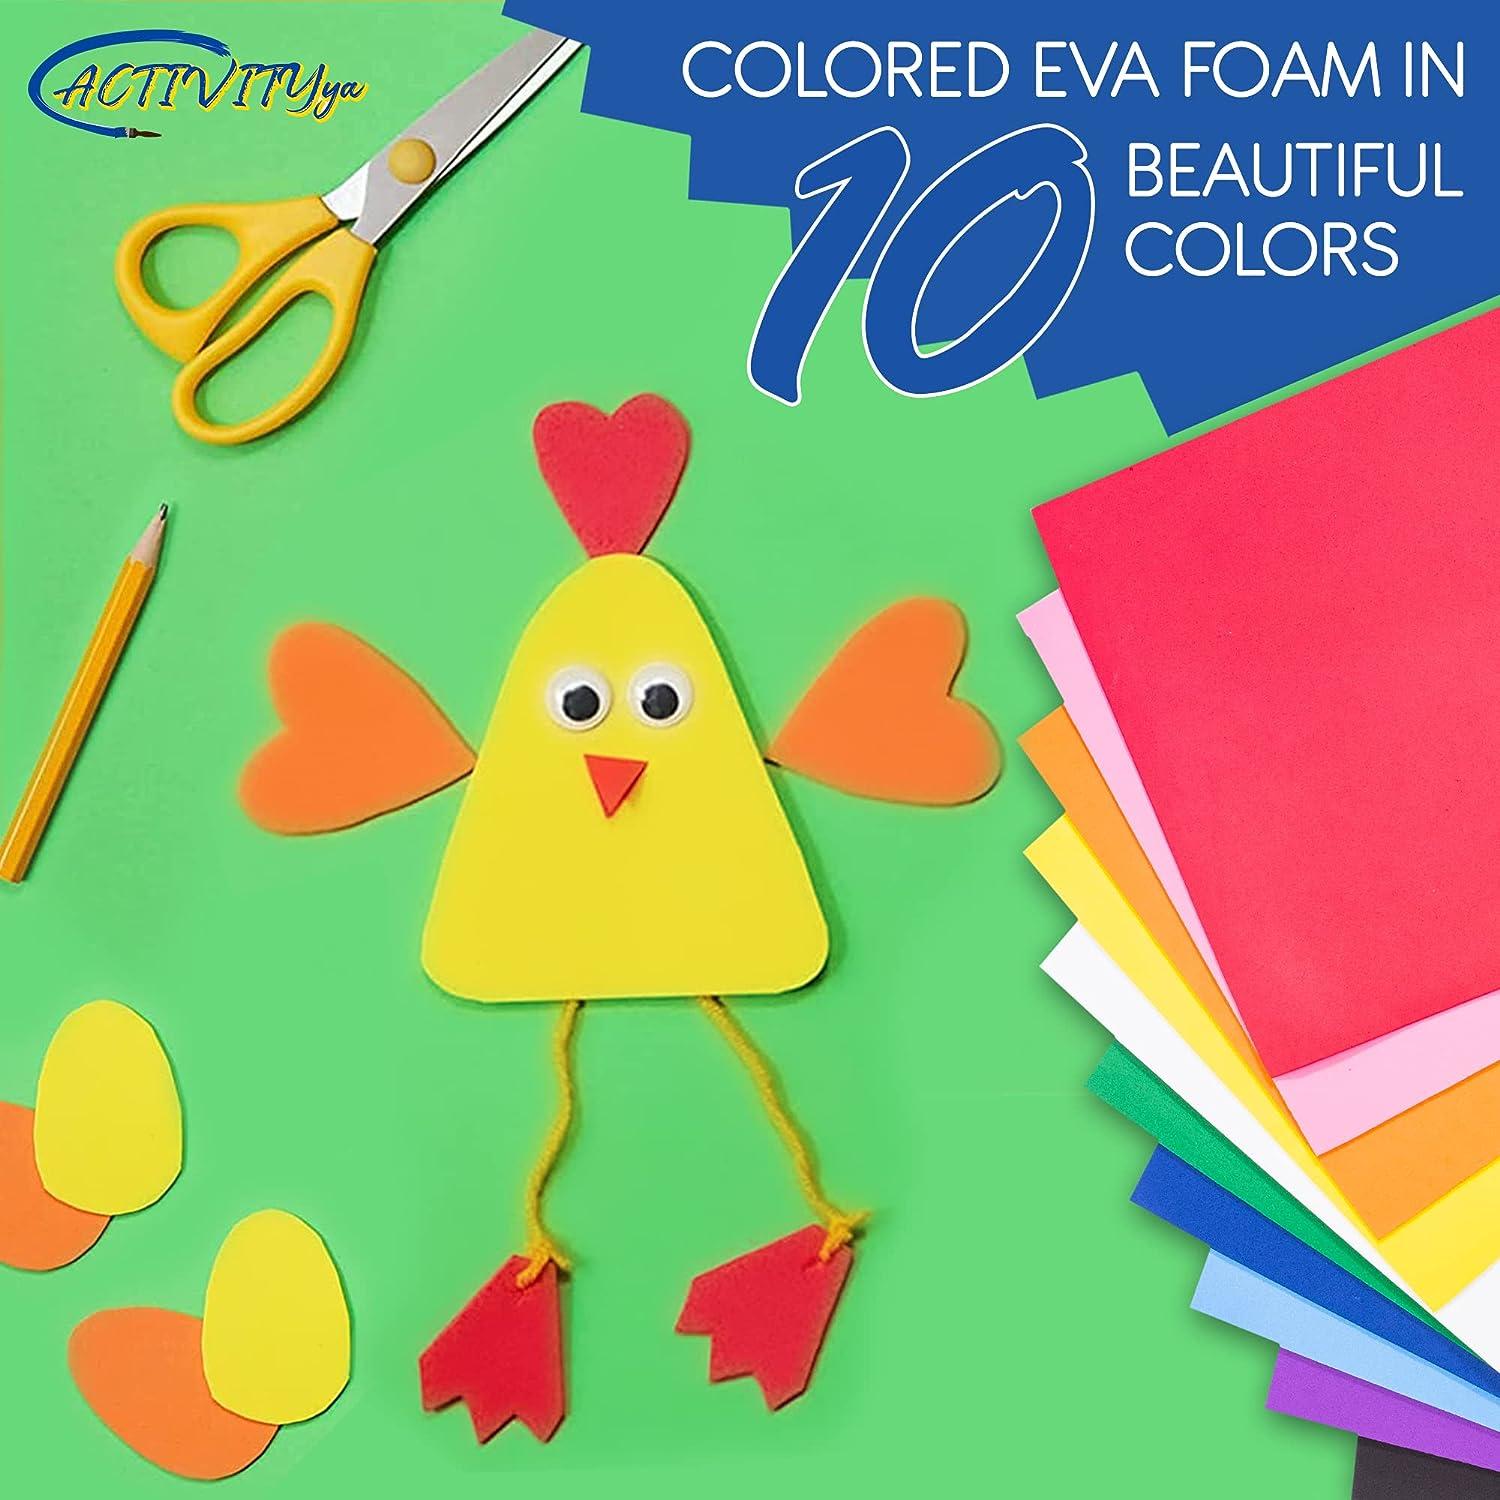 EVA Foam Sheets 9 x 12 Inch 10 Colors 2mm Thick Handicraft Foam Paper for  Arts and Crafts by ACTIVITYya - 10 Sheets ASSORTED